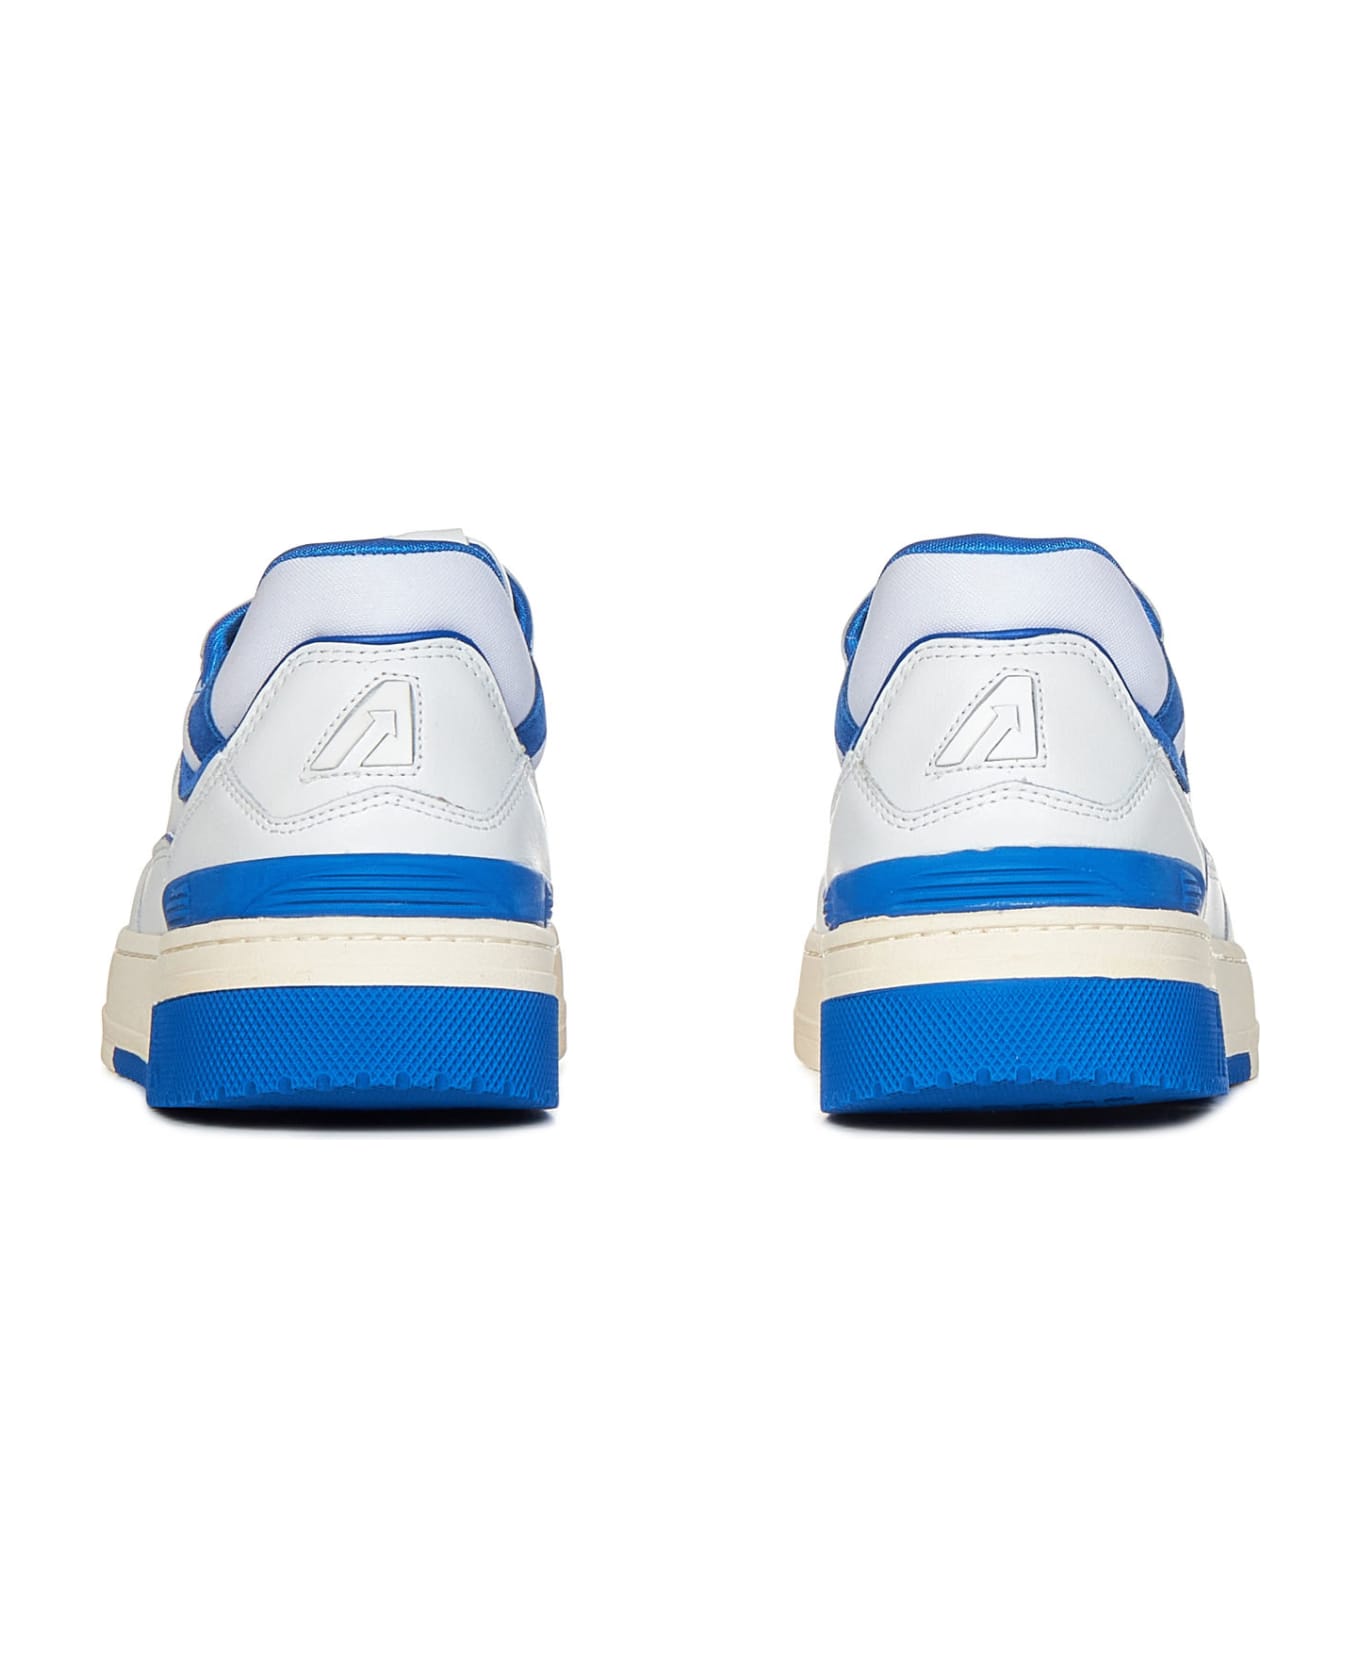 Autry Rookie Clc Low Sneakers - White